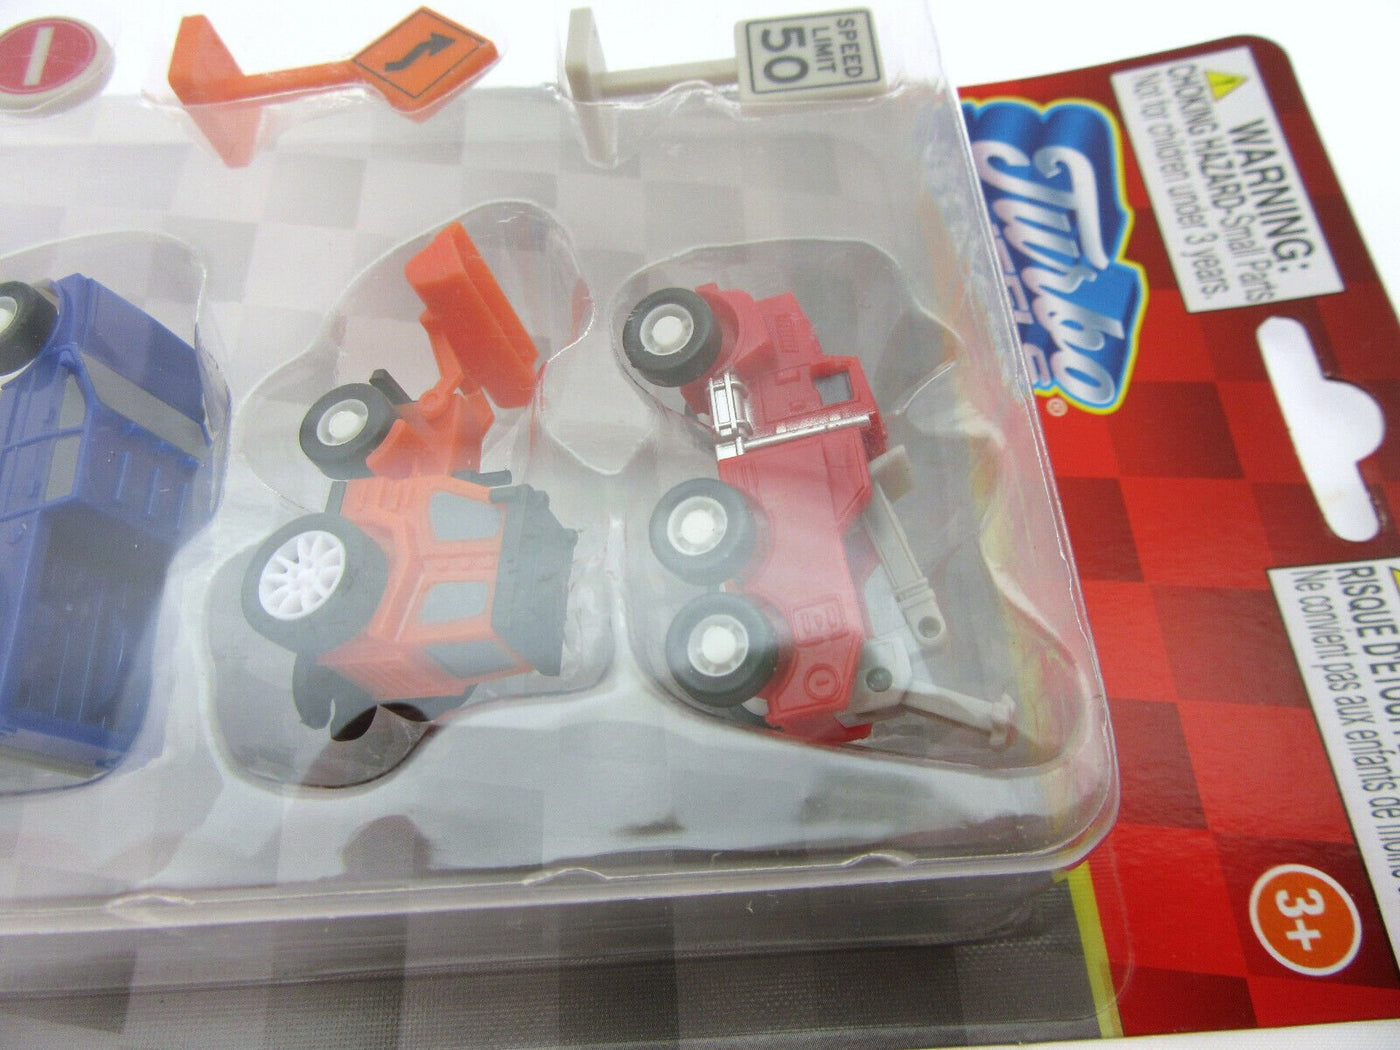 Turbo Wheels ~ Tow, Tractor, Pickup, Container ~ Trucks ~Tiny Toys!